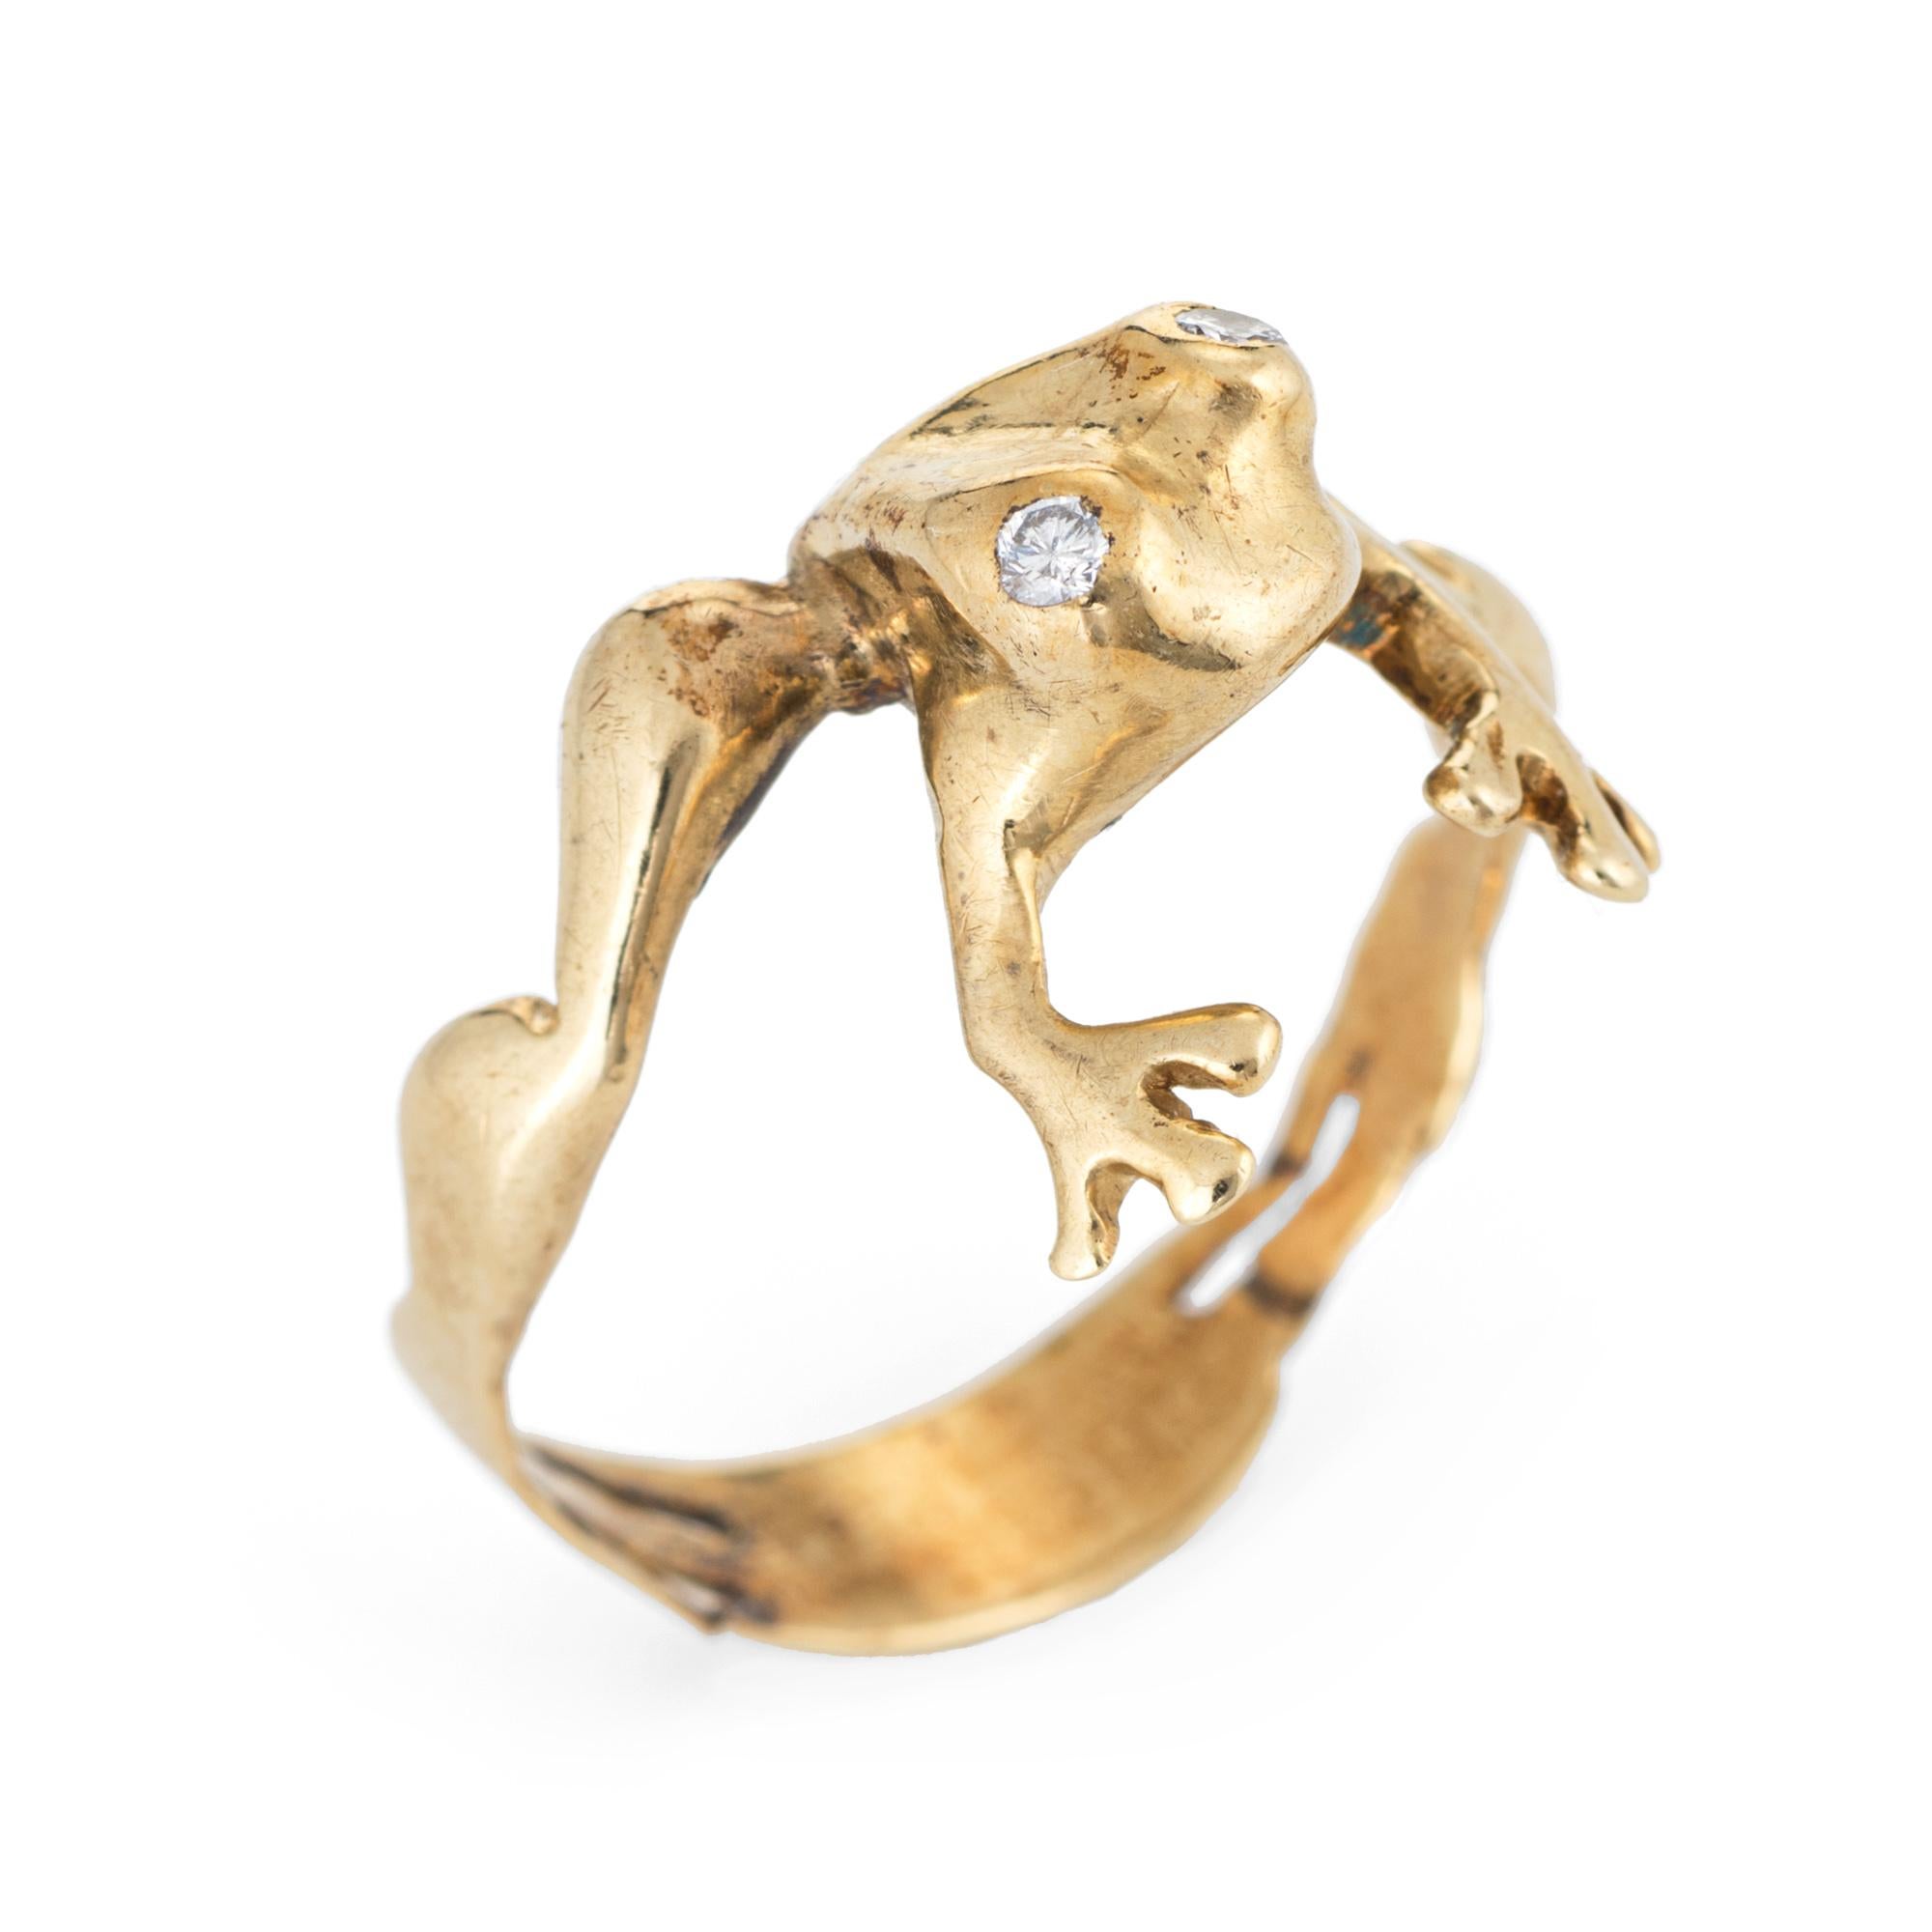 Stylish vintage frog band crafted in 14 karat yellow gold. 

Two estimated 0.01 carat diamonds are set into the eyes (estimated at H-I color and SI2 clarity).  

The sweet frog is designed to hug the finger and is finished with diamond eyes. The low